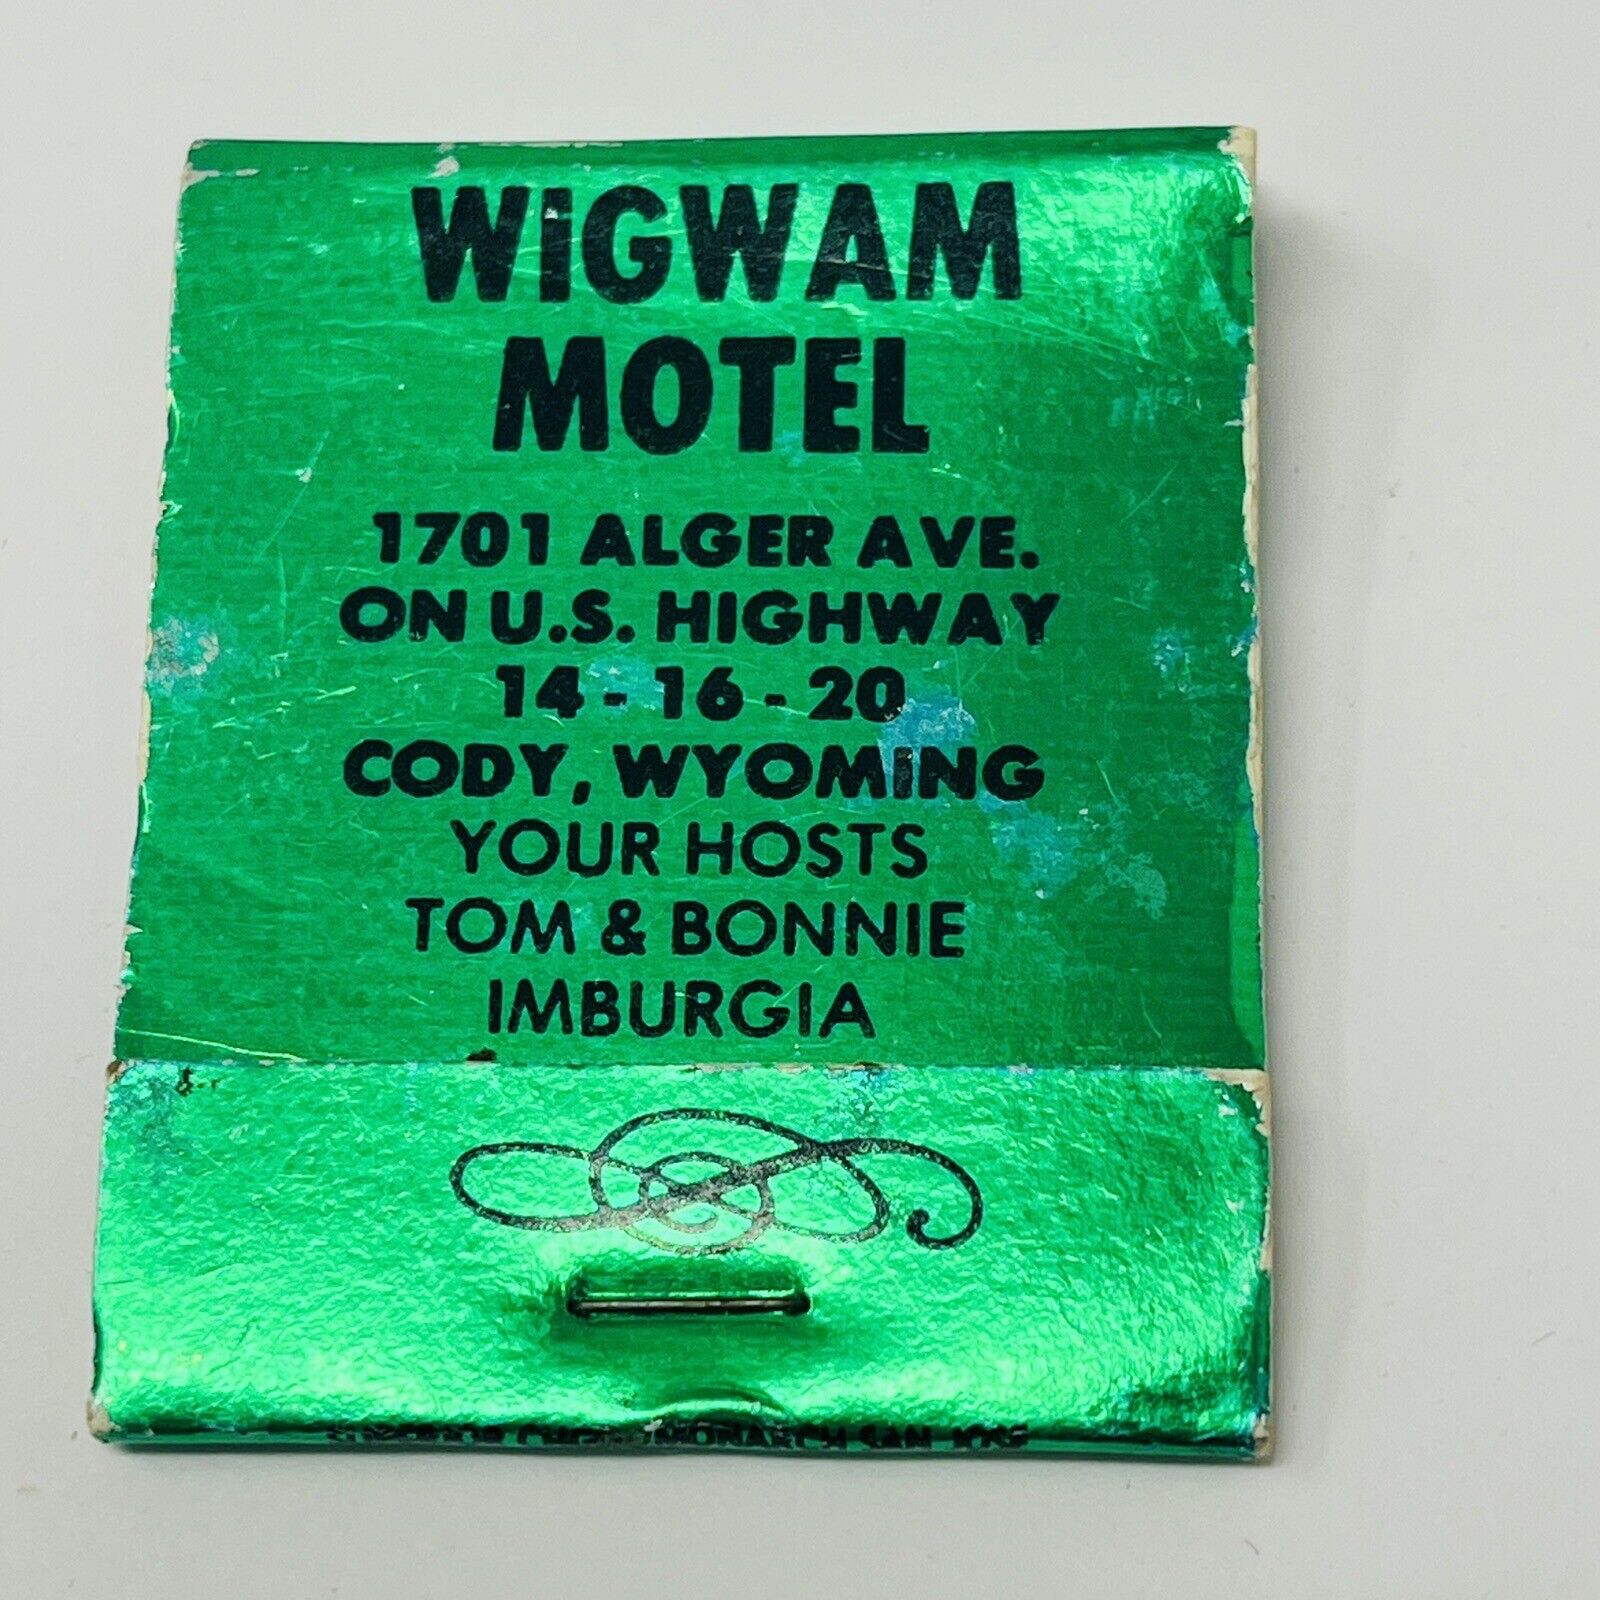 Wigwam Motel Cody WY Wyoming Matchbook Advertising Cover Vintage